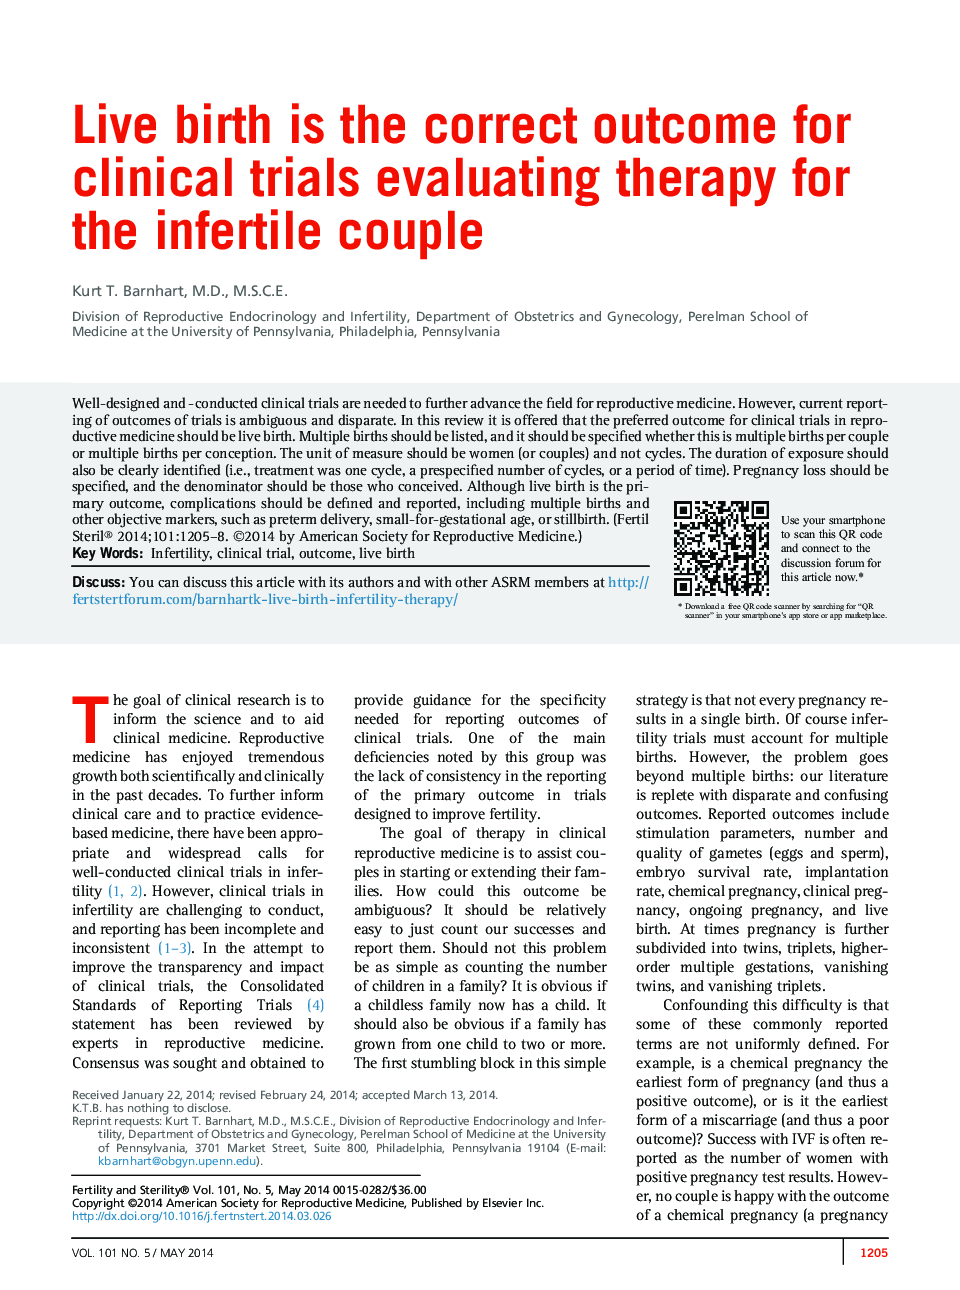 Live birth is the correct outcome for clinical trials evaluating therapy for the infertile couple 